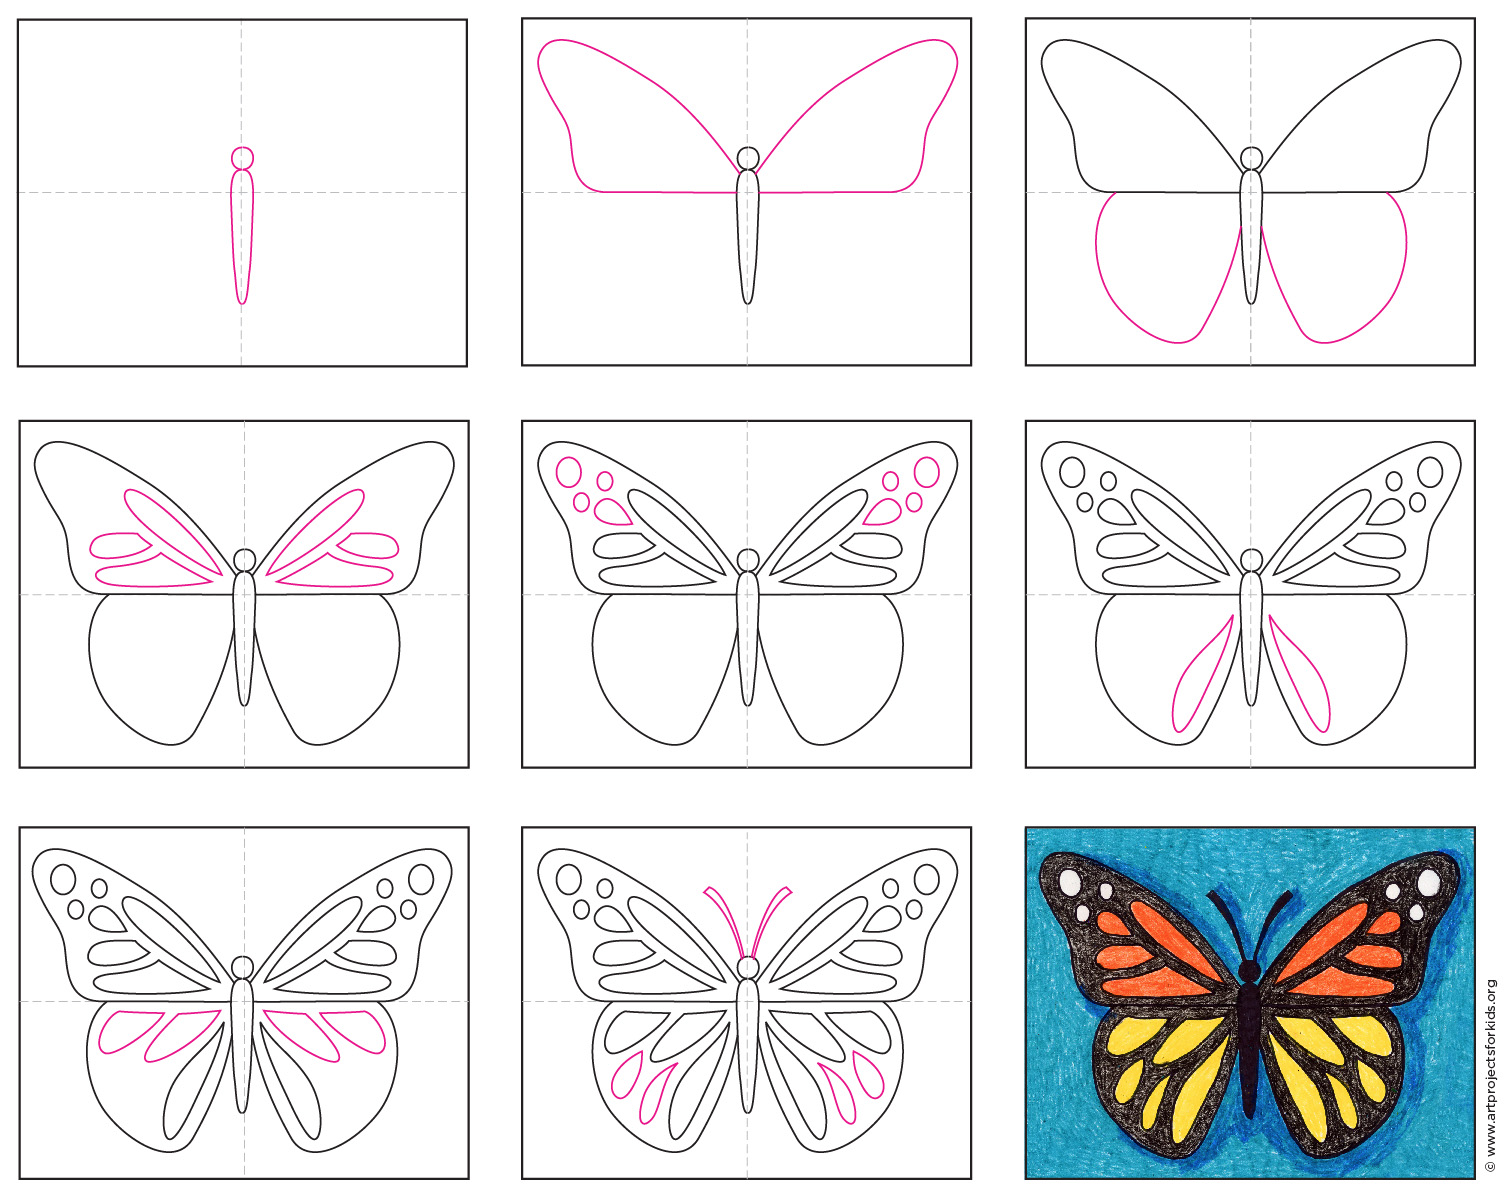 Easy How to Draw Butterfly Tutorial and Butterfly Coloring Page